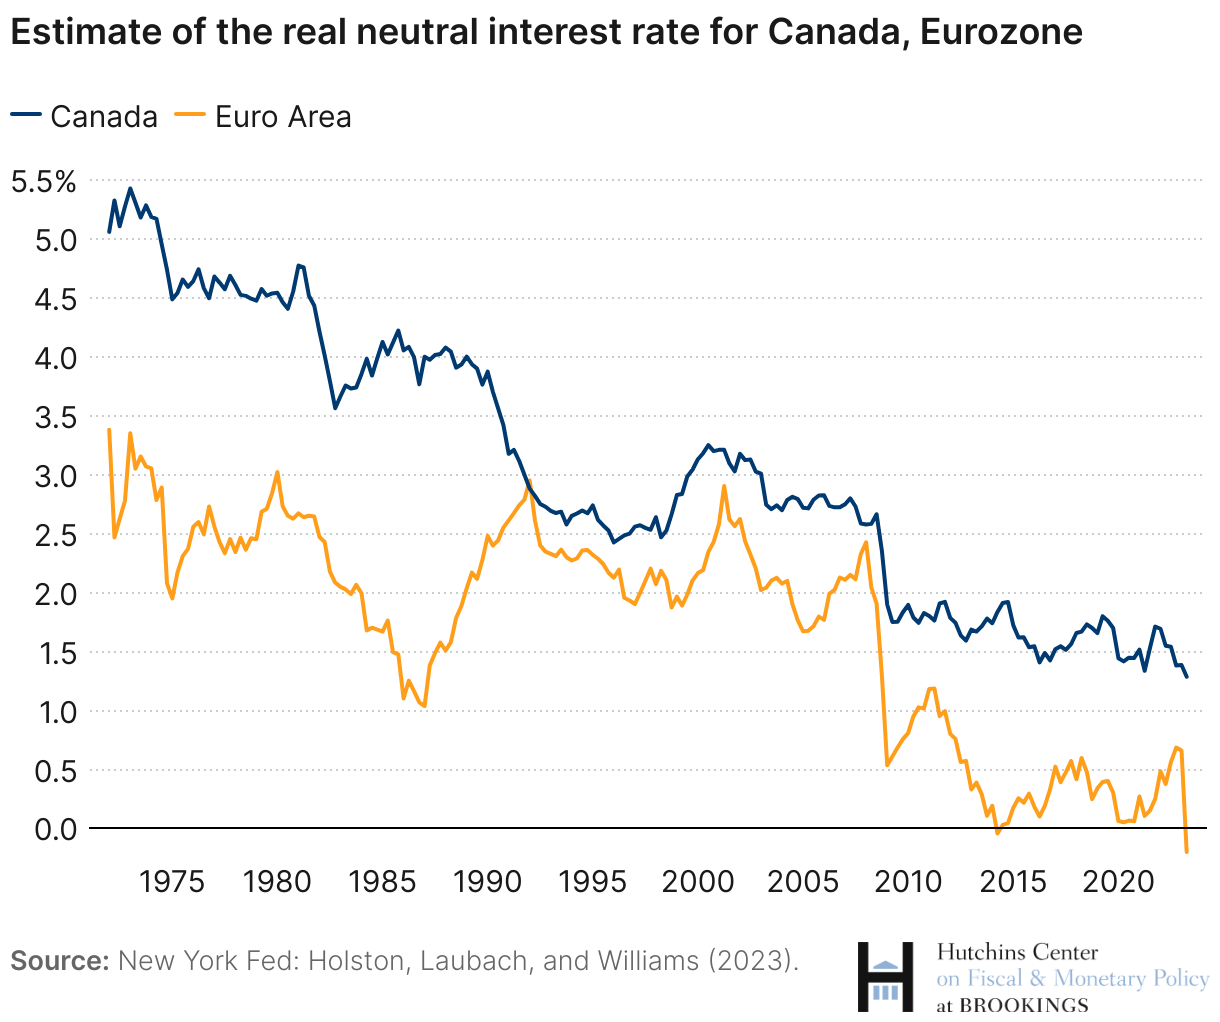 Real neutral rate estimates have declined considerably in Canada and the Euro Area since the 1970s.